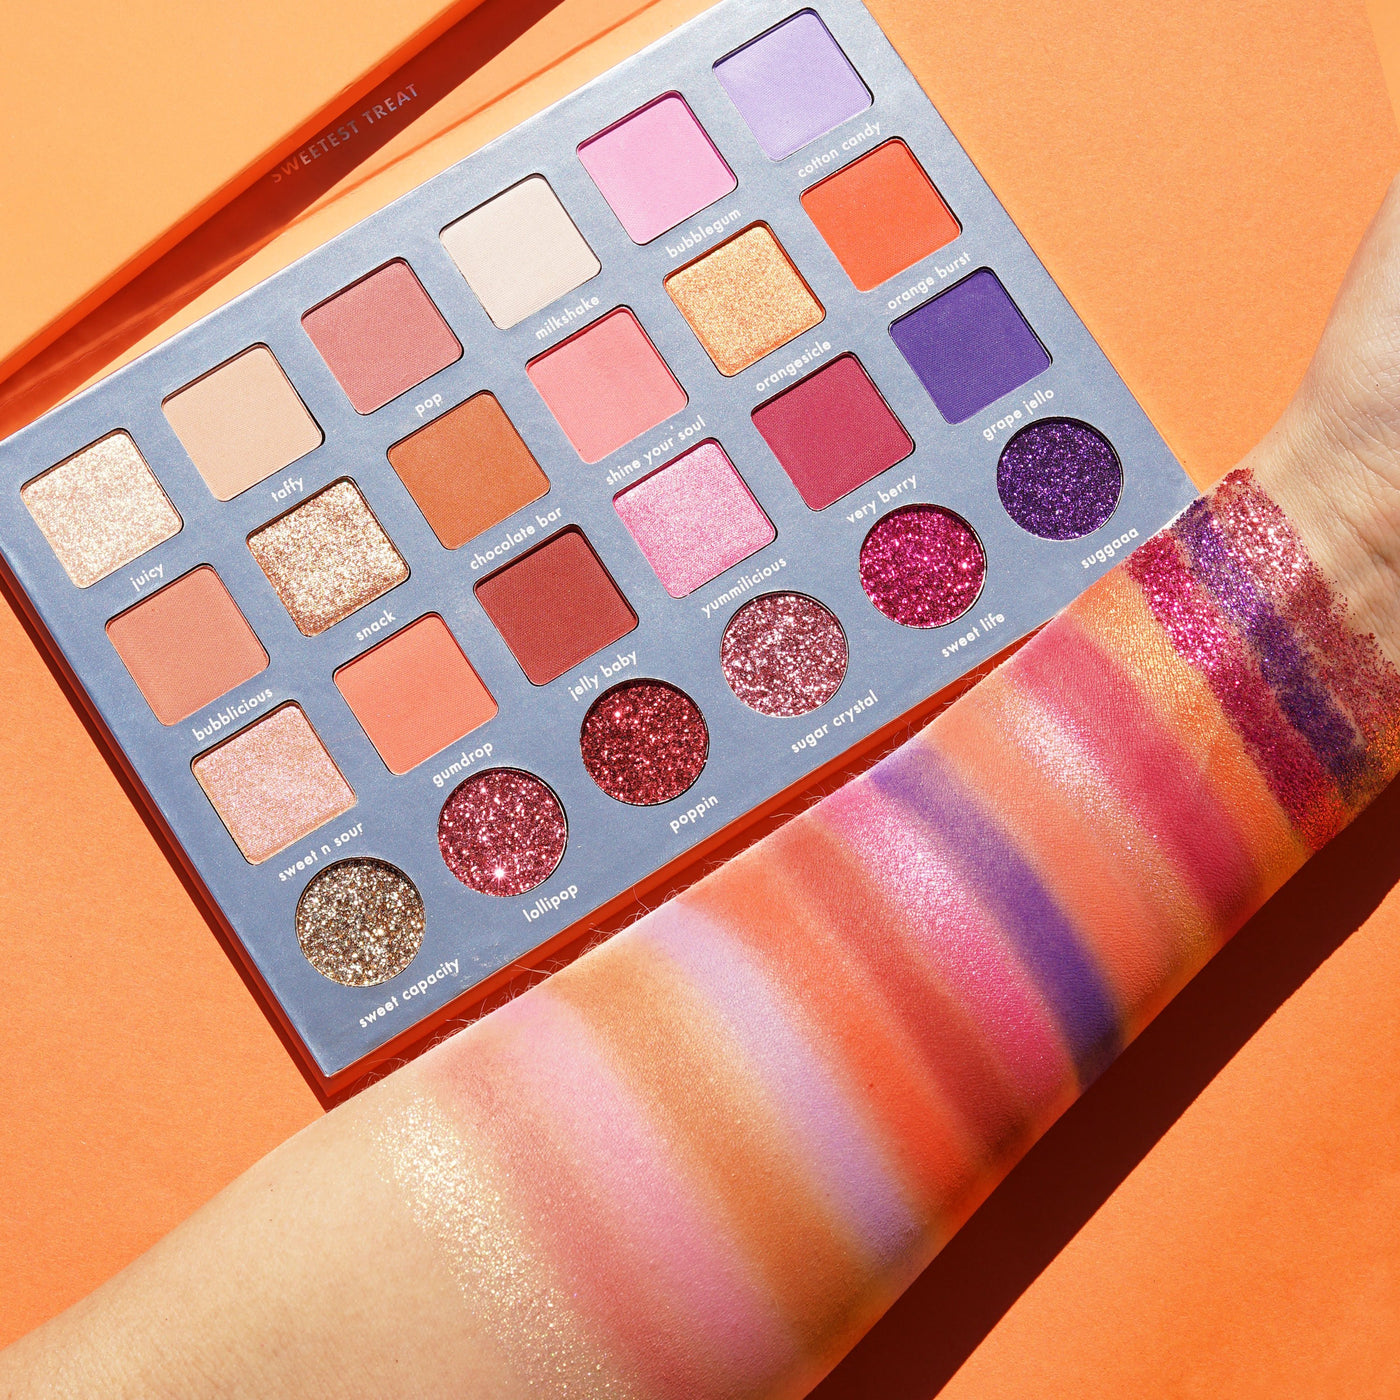 Kara Beauty's Sweetest Treat 24 color eyeshadow palette swatches